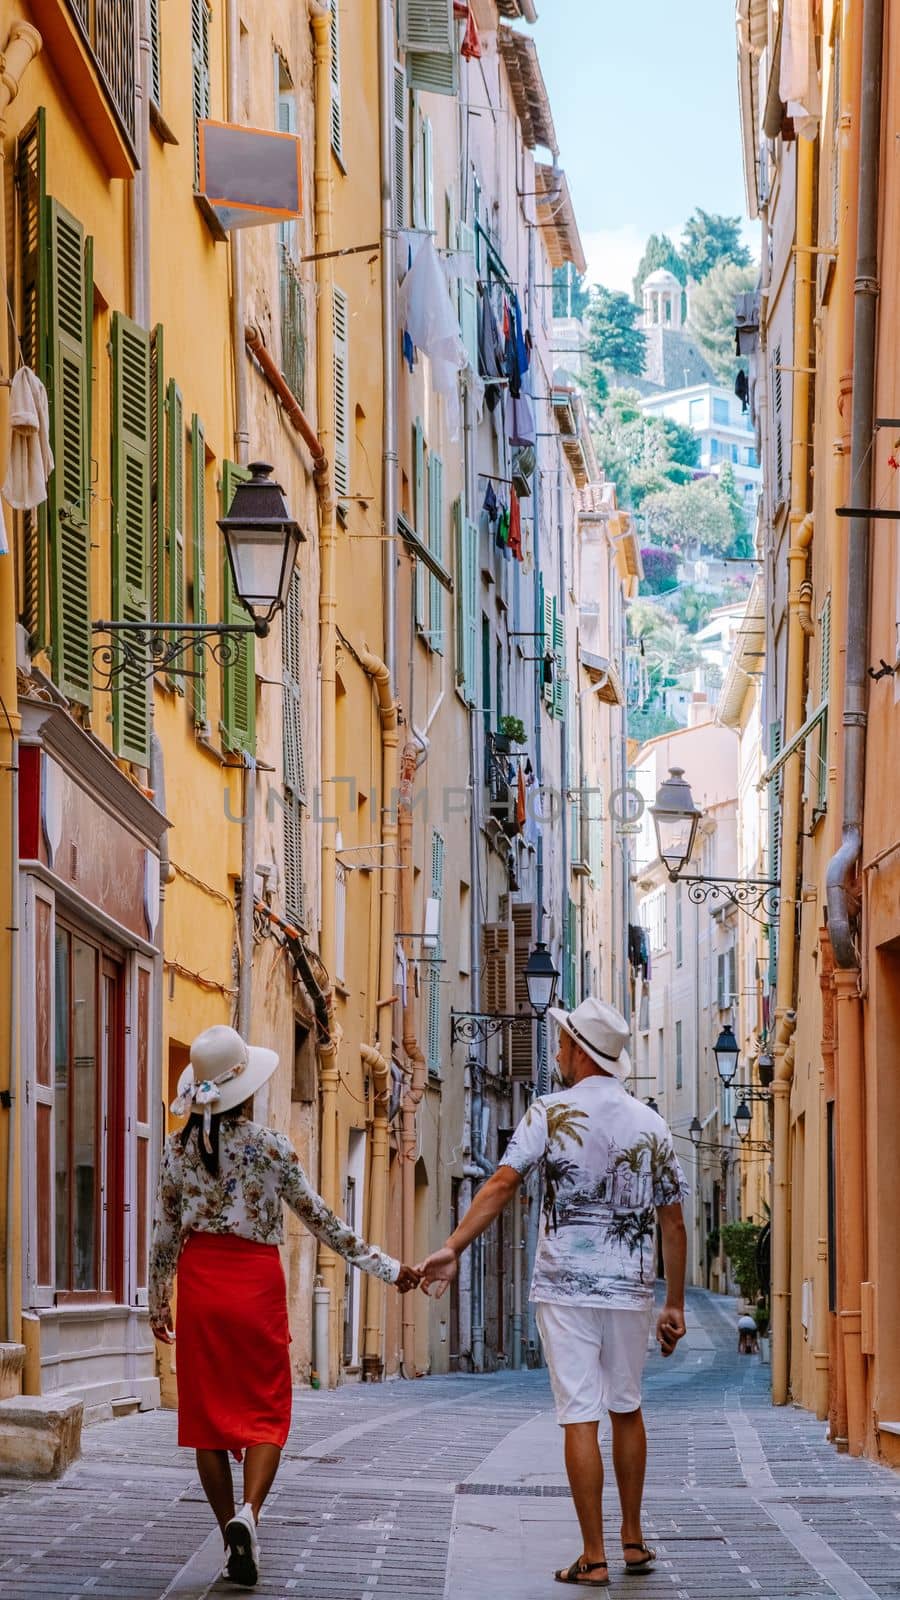 A couple of men and women on summer vacation in France visit the city of Menton Cote d Azure on the French Riviera